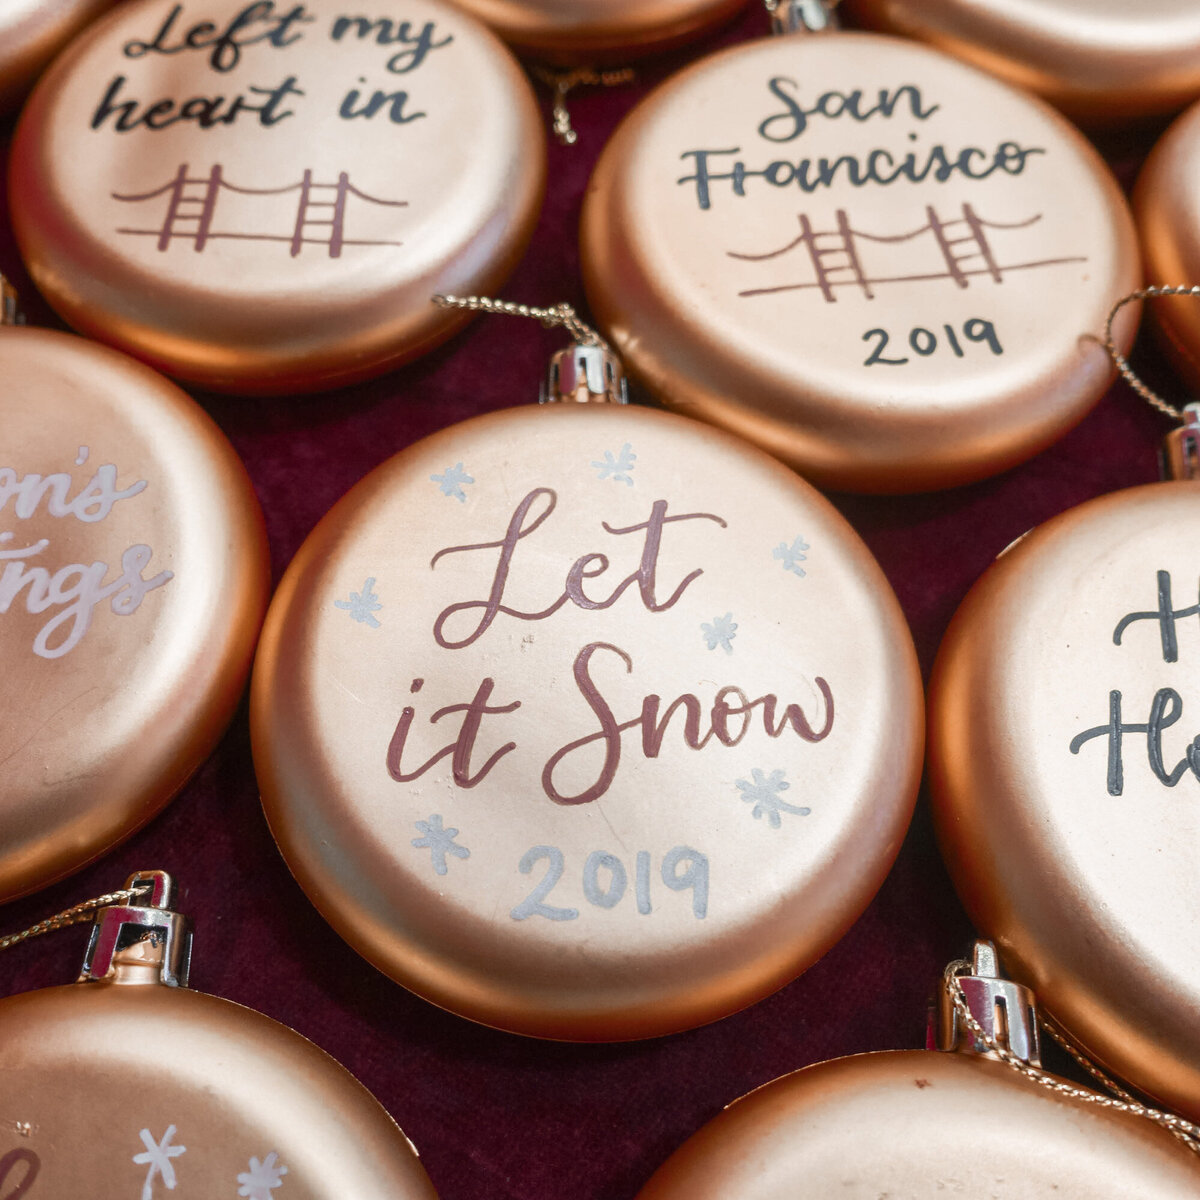 Ornaments personalized on site with calligraphy at an airport store